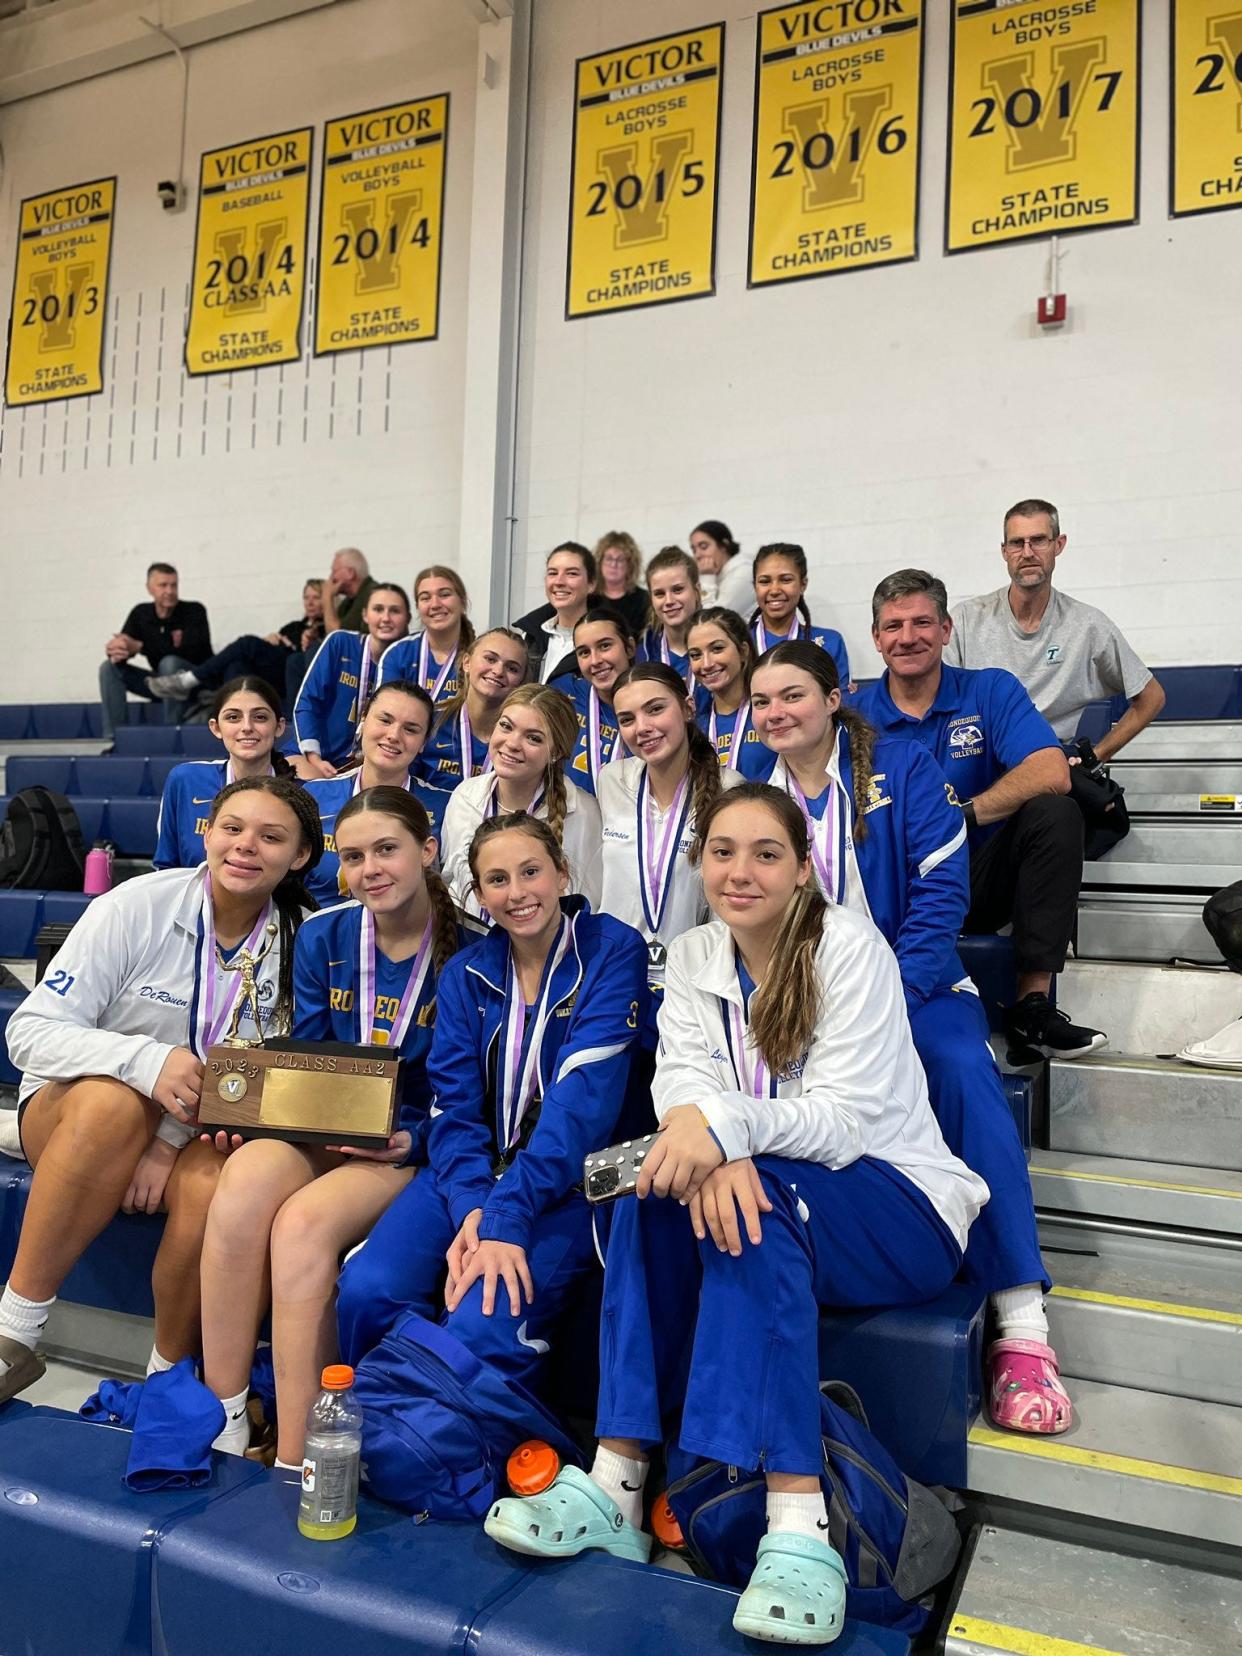 Irondequoit girls volleyball team after winning their second straight Section V Championship, avenging a regular season loss to Spencerport with a 3-1 win in the Class AA2 final Saturday, Nov. 4 at Victor.